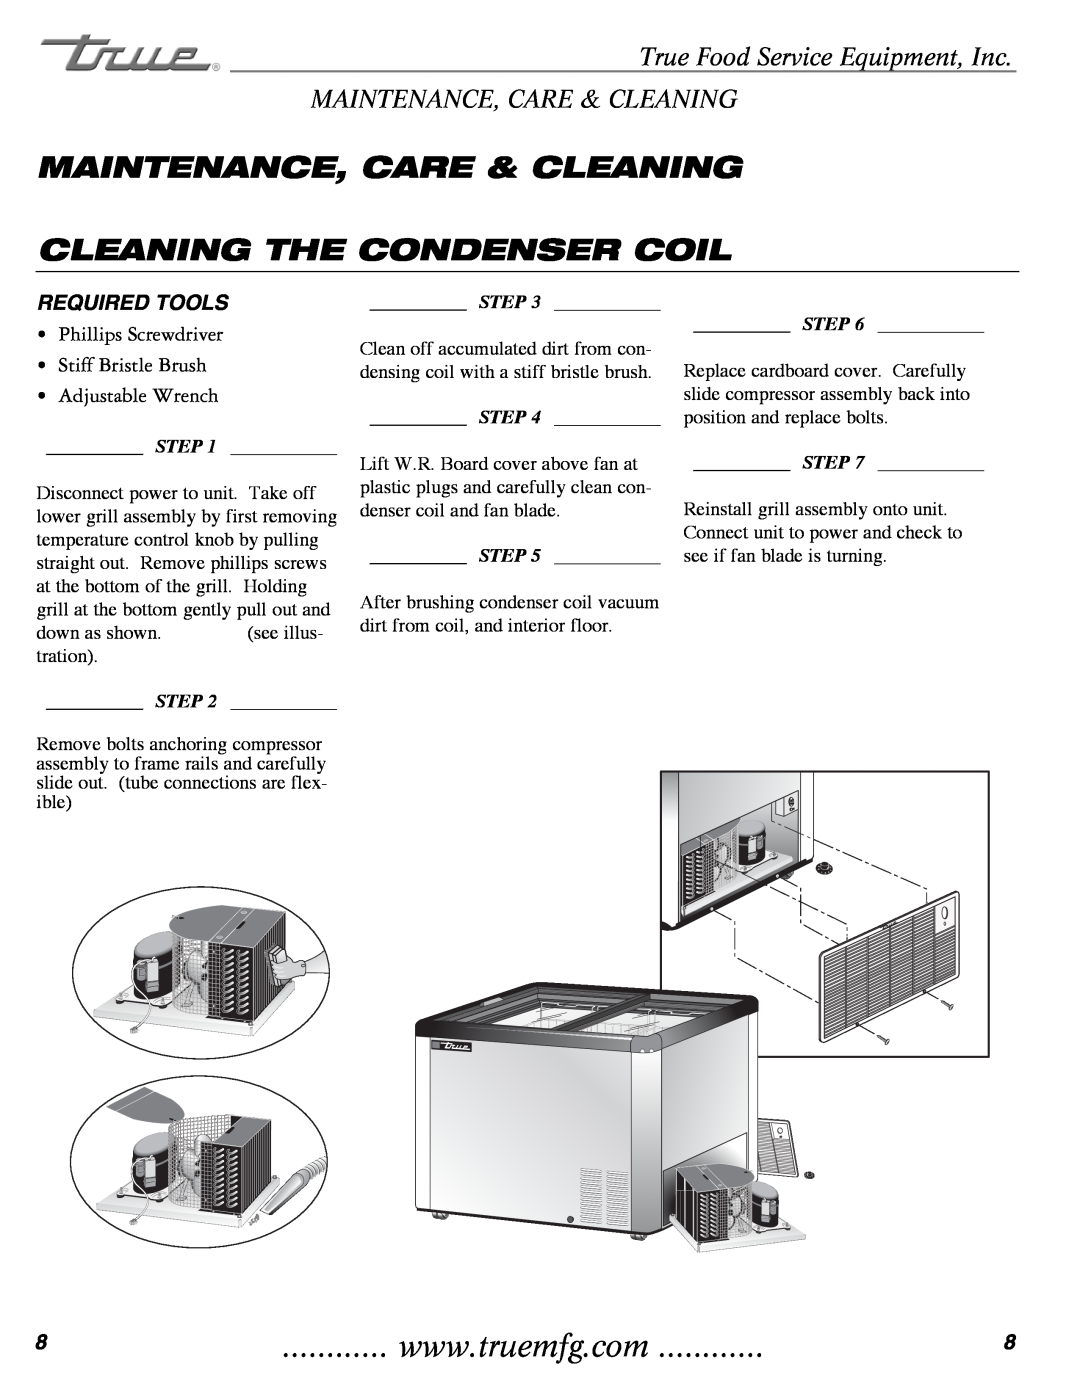 True Manufacturing Company THF-41FL Maintenance, Care & Cleaning Cleaning The Condenser Coil, Required Tools, Step 